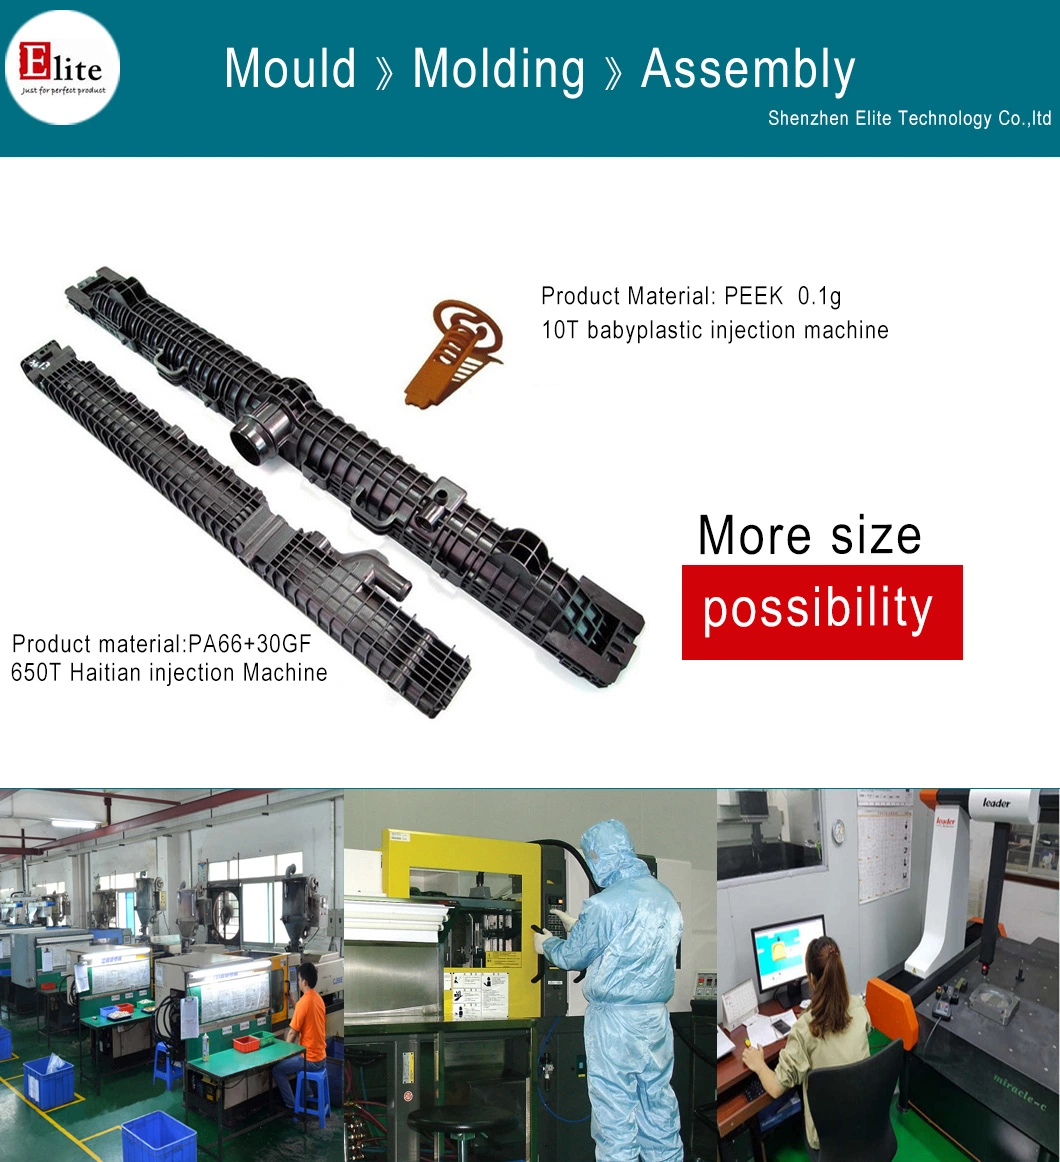 OEM/ODM Customized Rapid Prototype Mould Manufacturer ABS Plastic Parts Injection Molding for Small Molded Parts